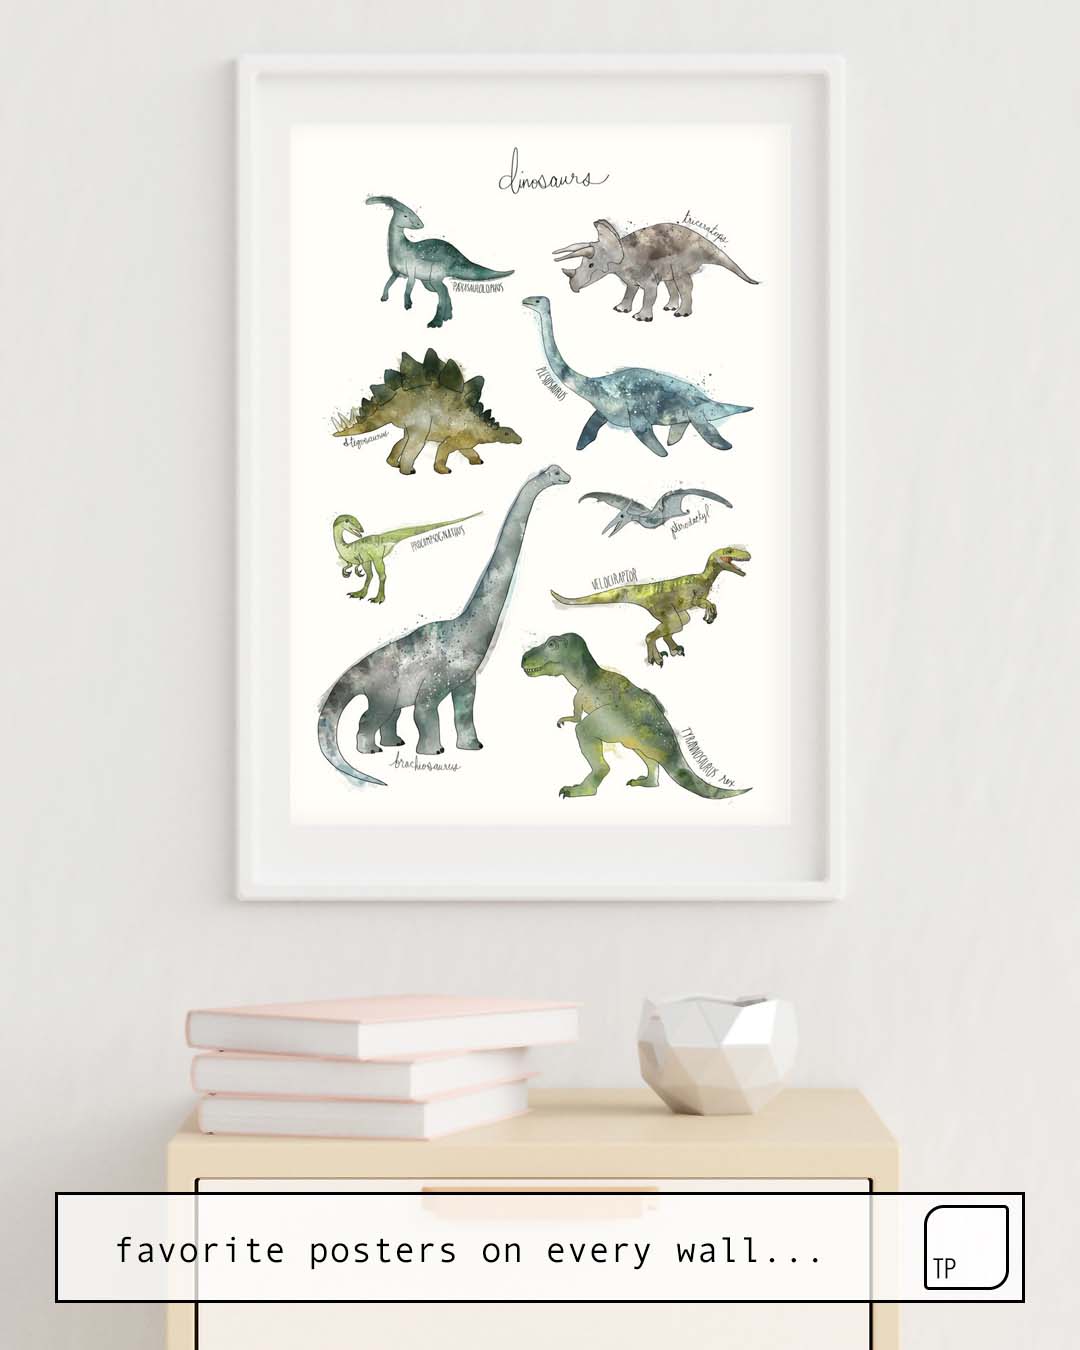 The photo shows an example of furnishing with the motif DINOSAURS by Amy Hamilton as mural